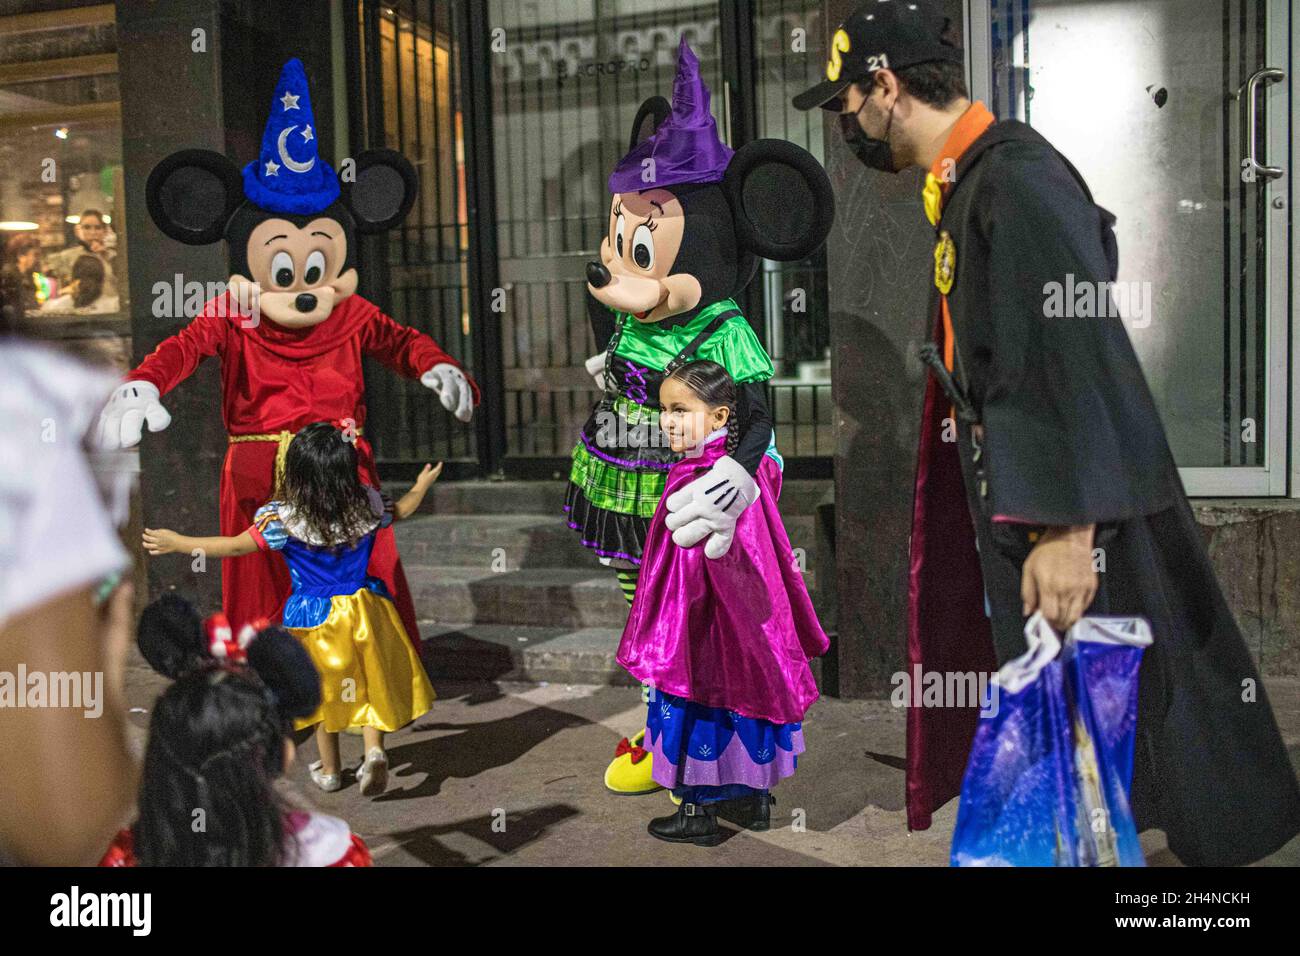 Mickey and Mimi, Mickey mouse, Walt Disney boots, children's characters in  Hermosillo, Mexico on Oct 2021. Mickey y Mimi, raton Mickey, botargas de  Walt Disney , personajes infantiles en Hermosillo, Mexico a